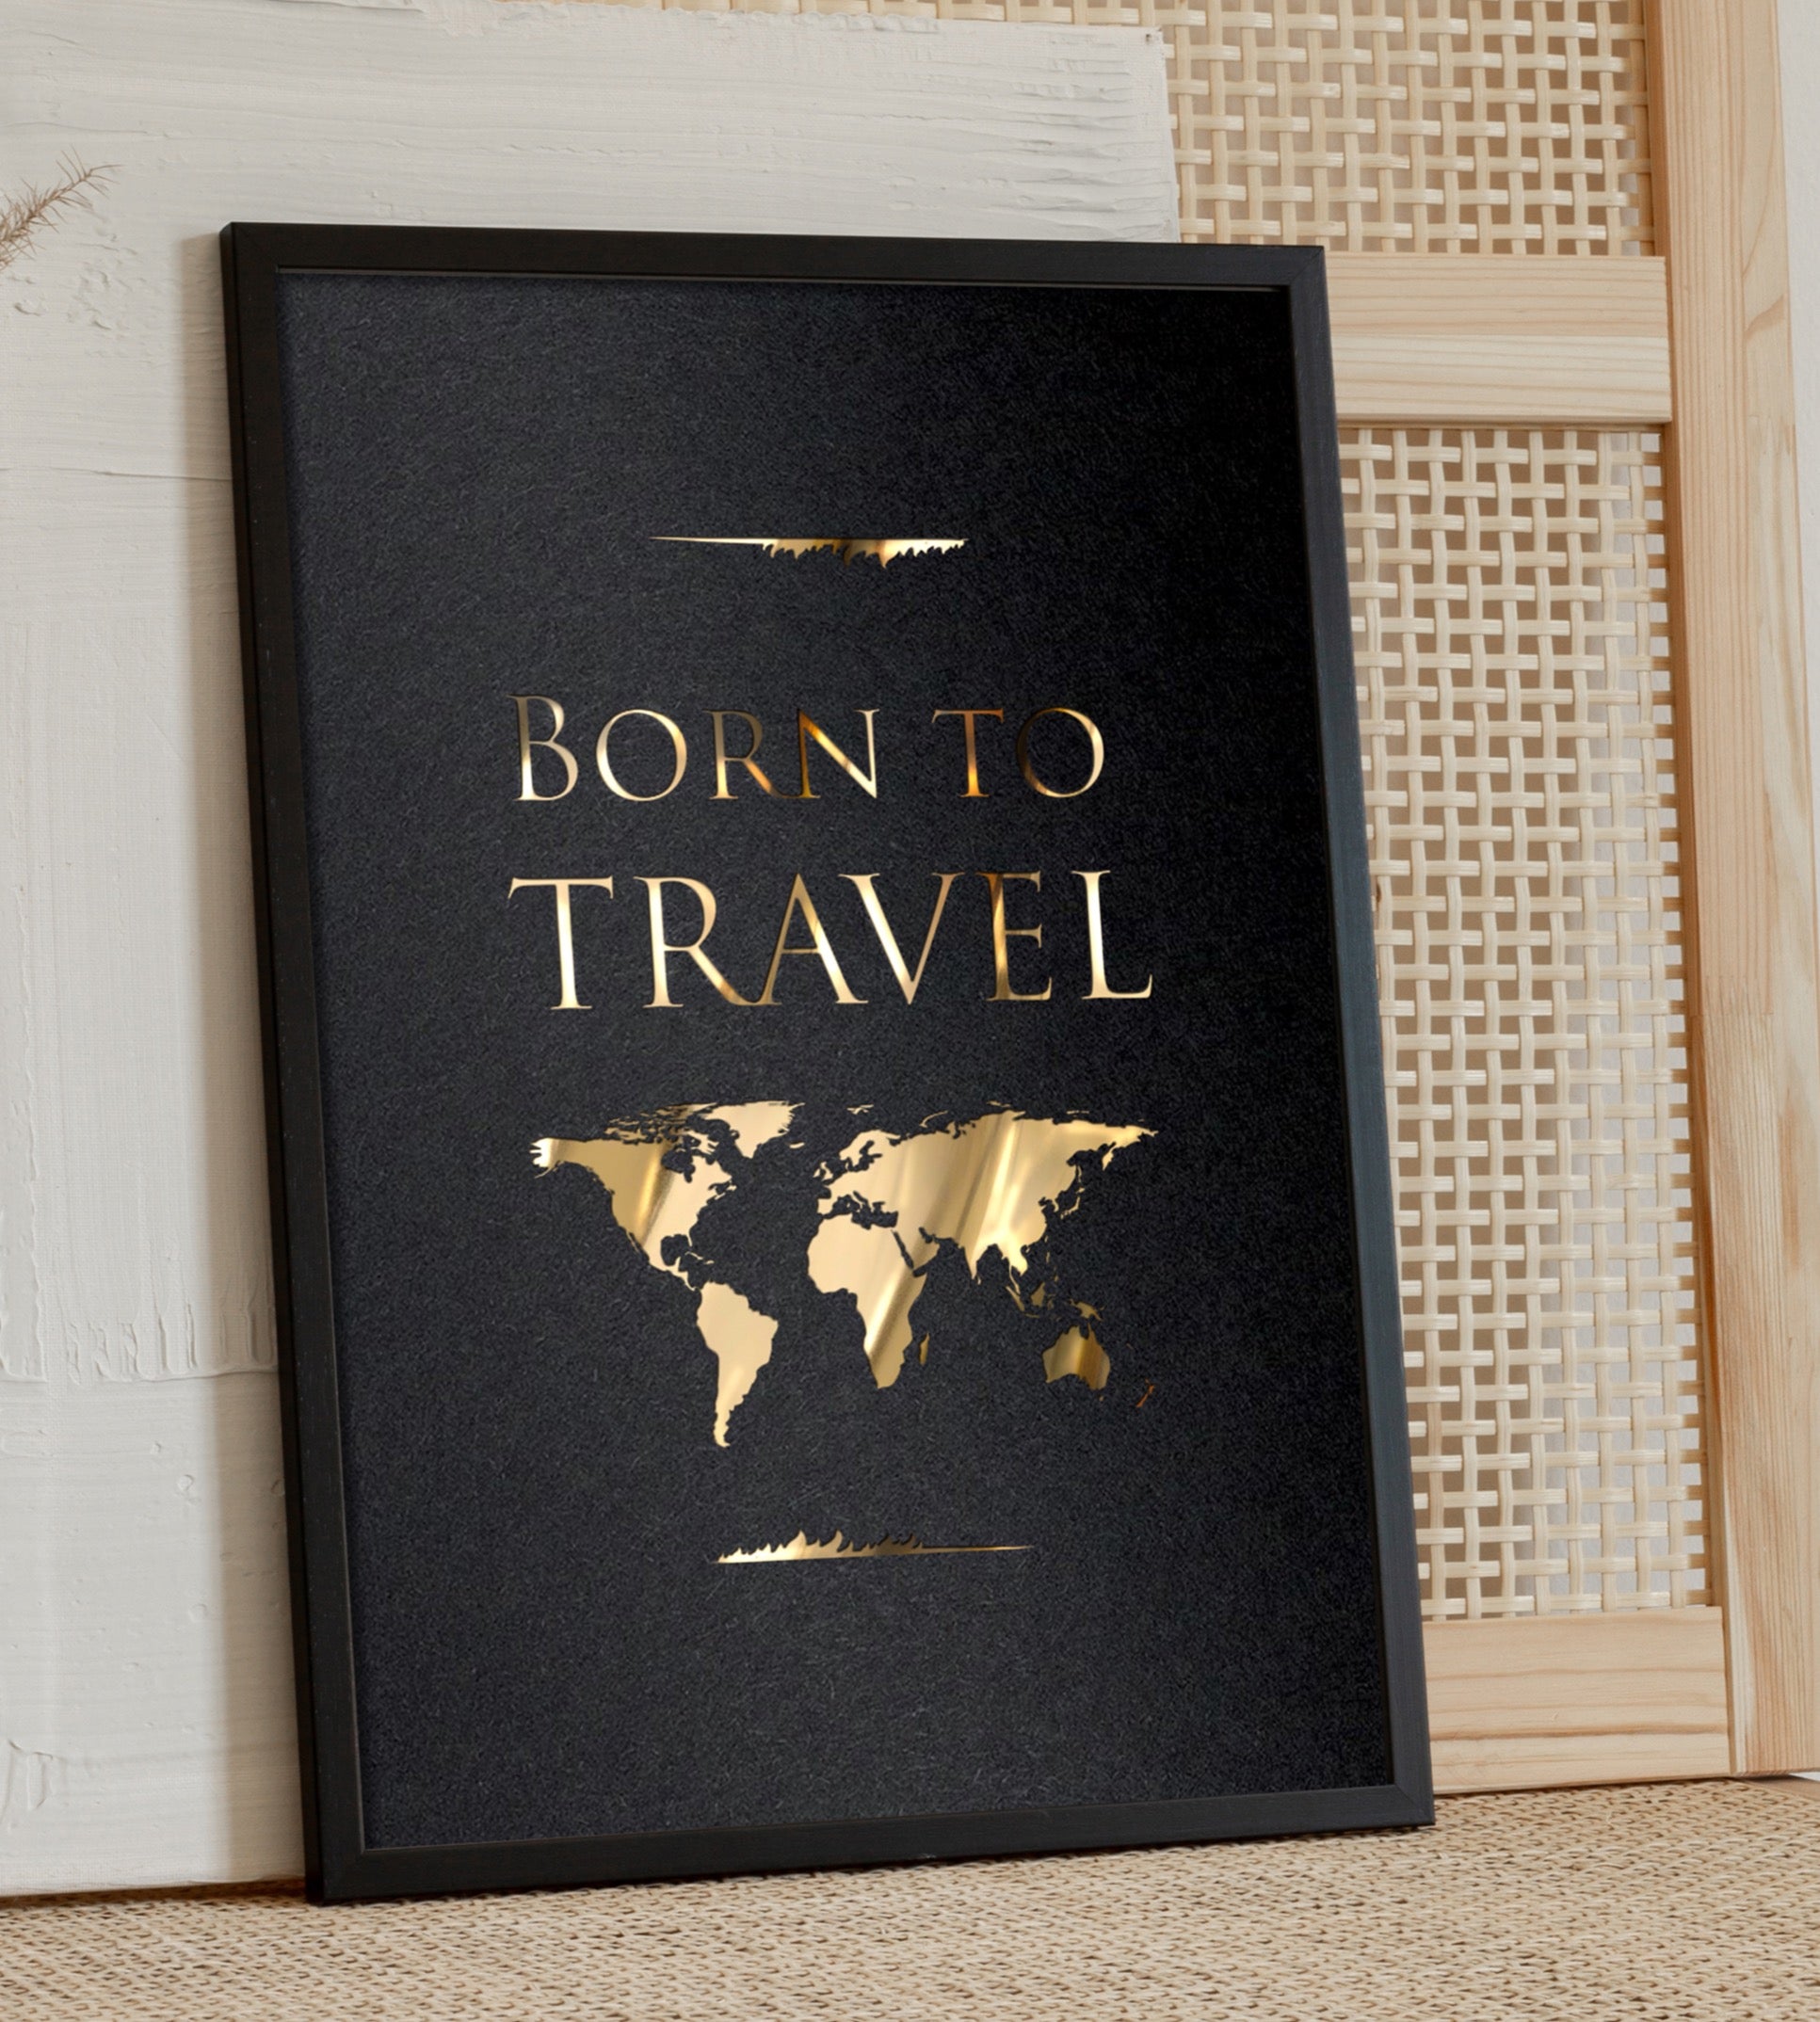 Born to travel by Arteonn Letterpress Displayed in Home Setting